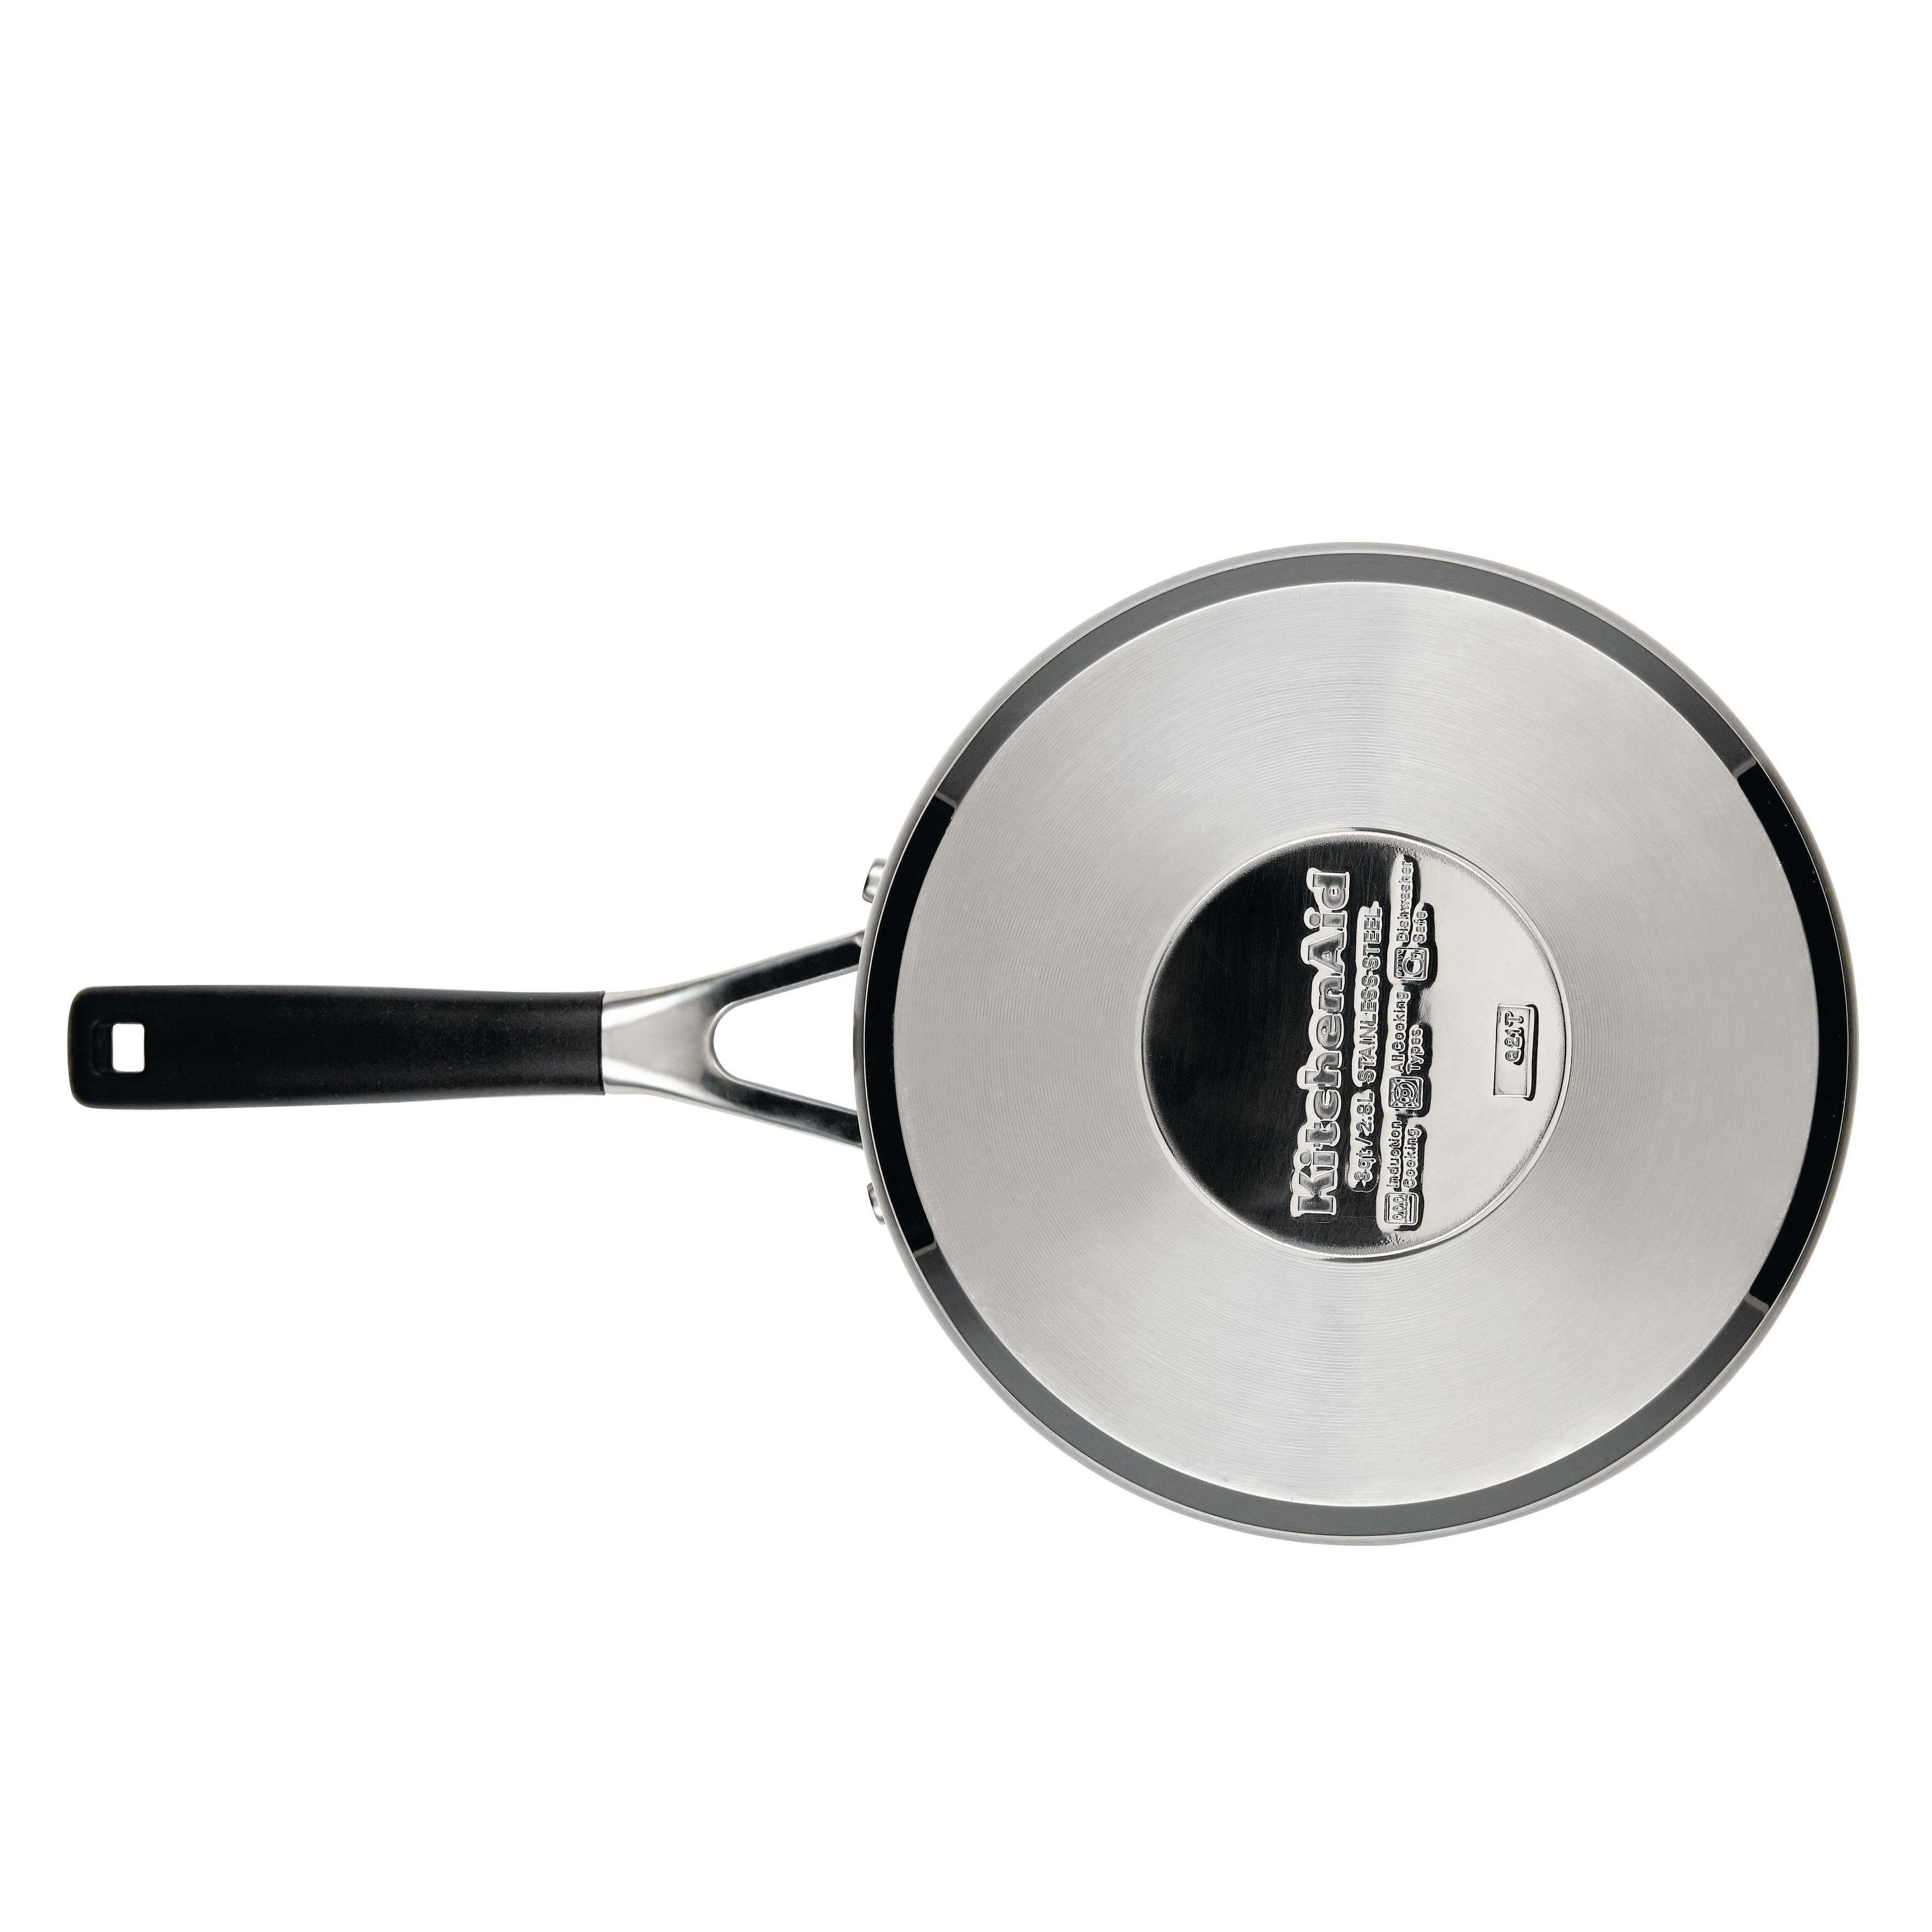 KitchenAid Stainless Steel Induction Saucepan with Lid, 3-Quart, Brushed Stainless  Steel - Bed Bath & Beyond - 38077592